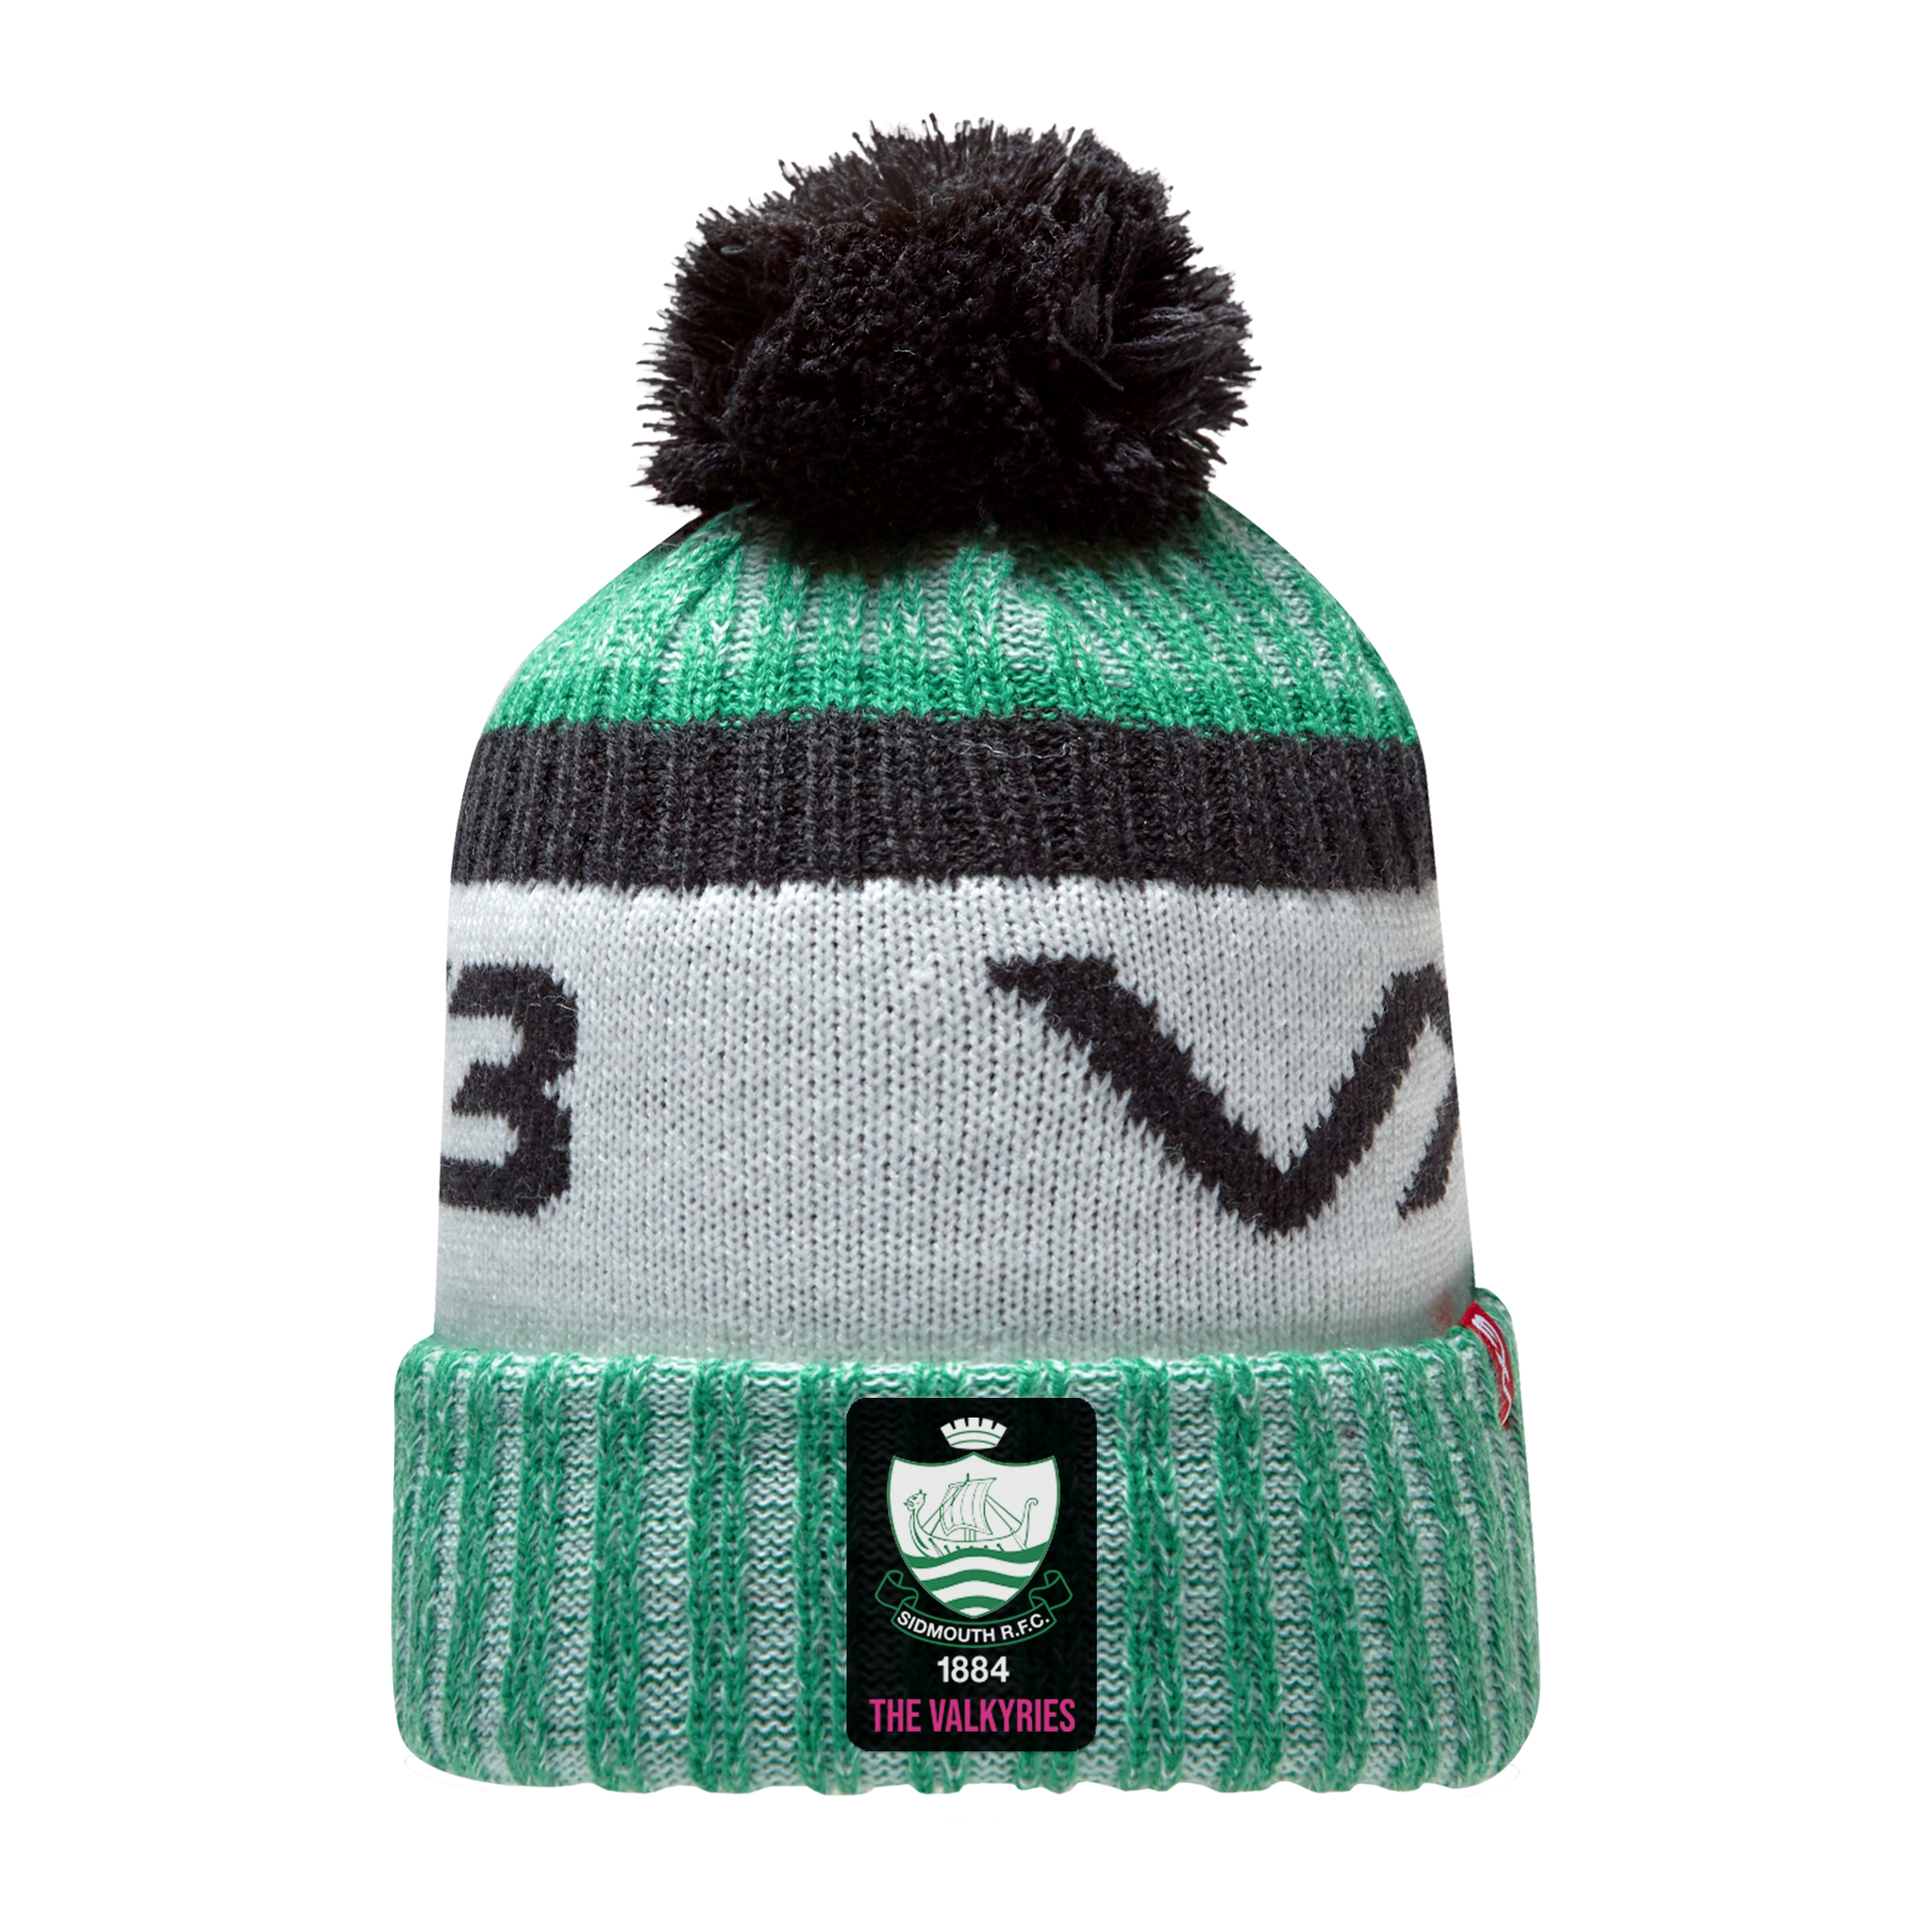 Sidmouth RFC Womens (The Valkyries) Marl Bobble Hat Emerald